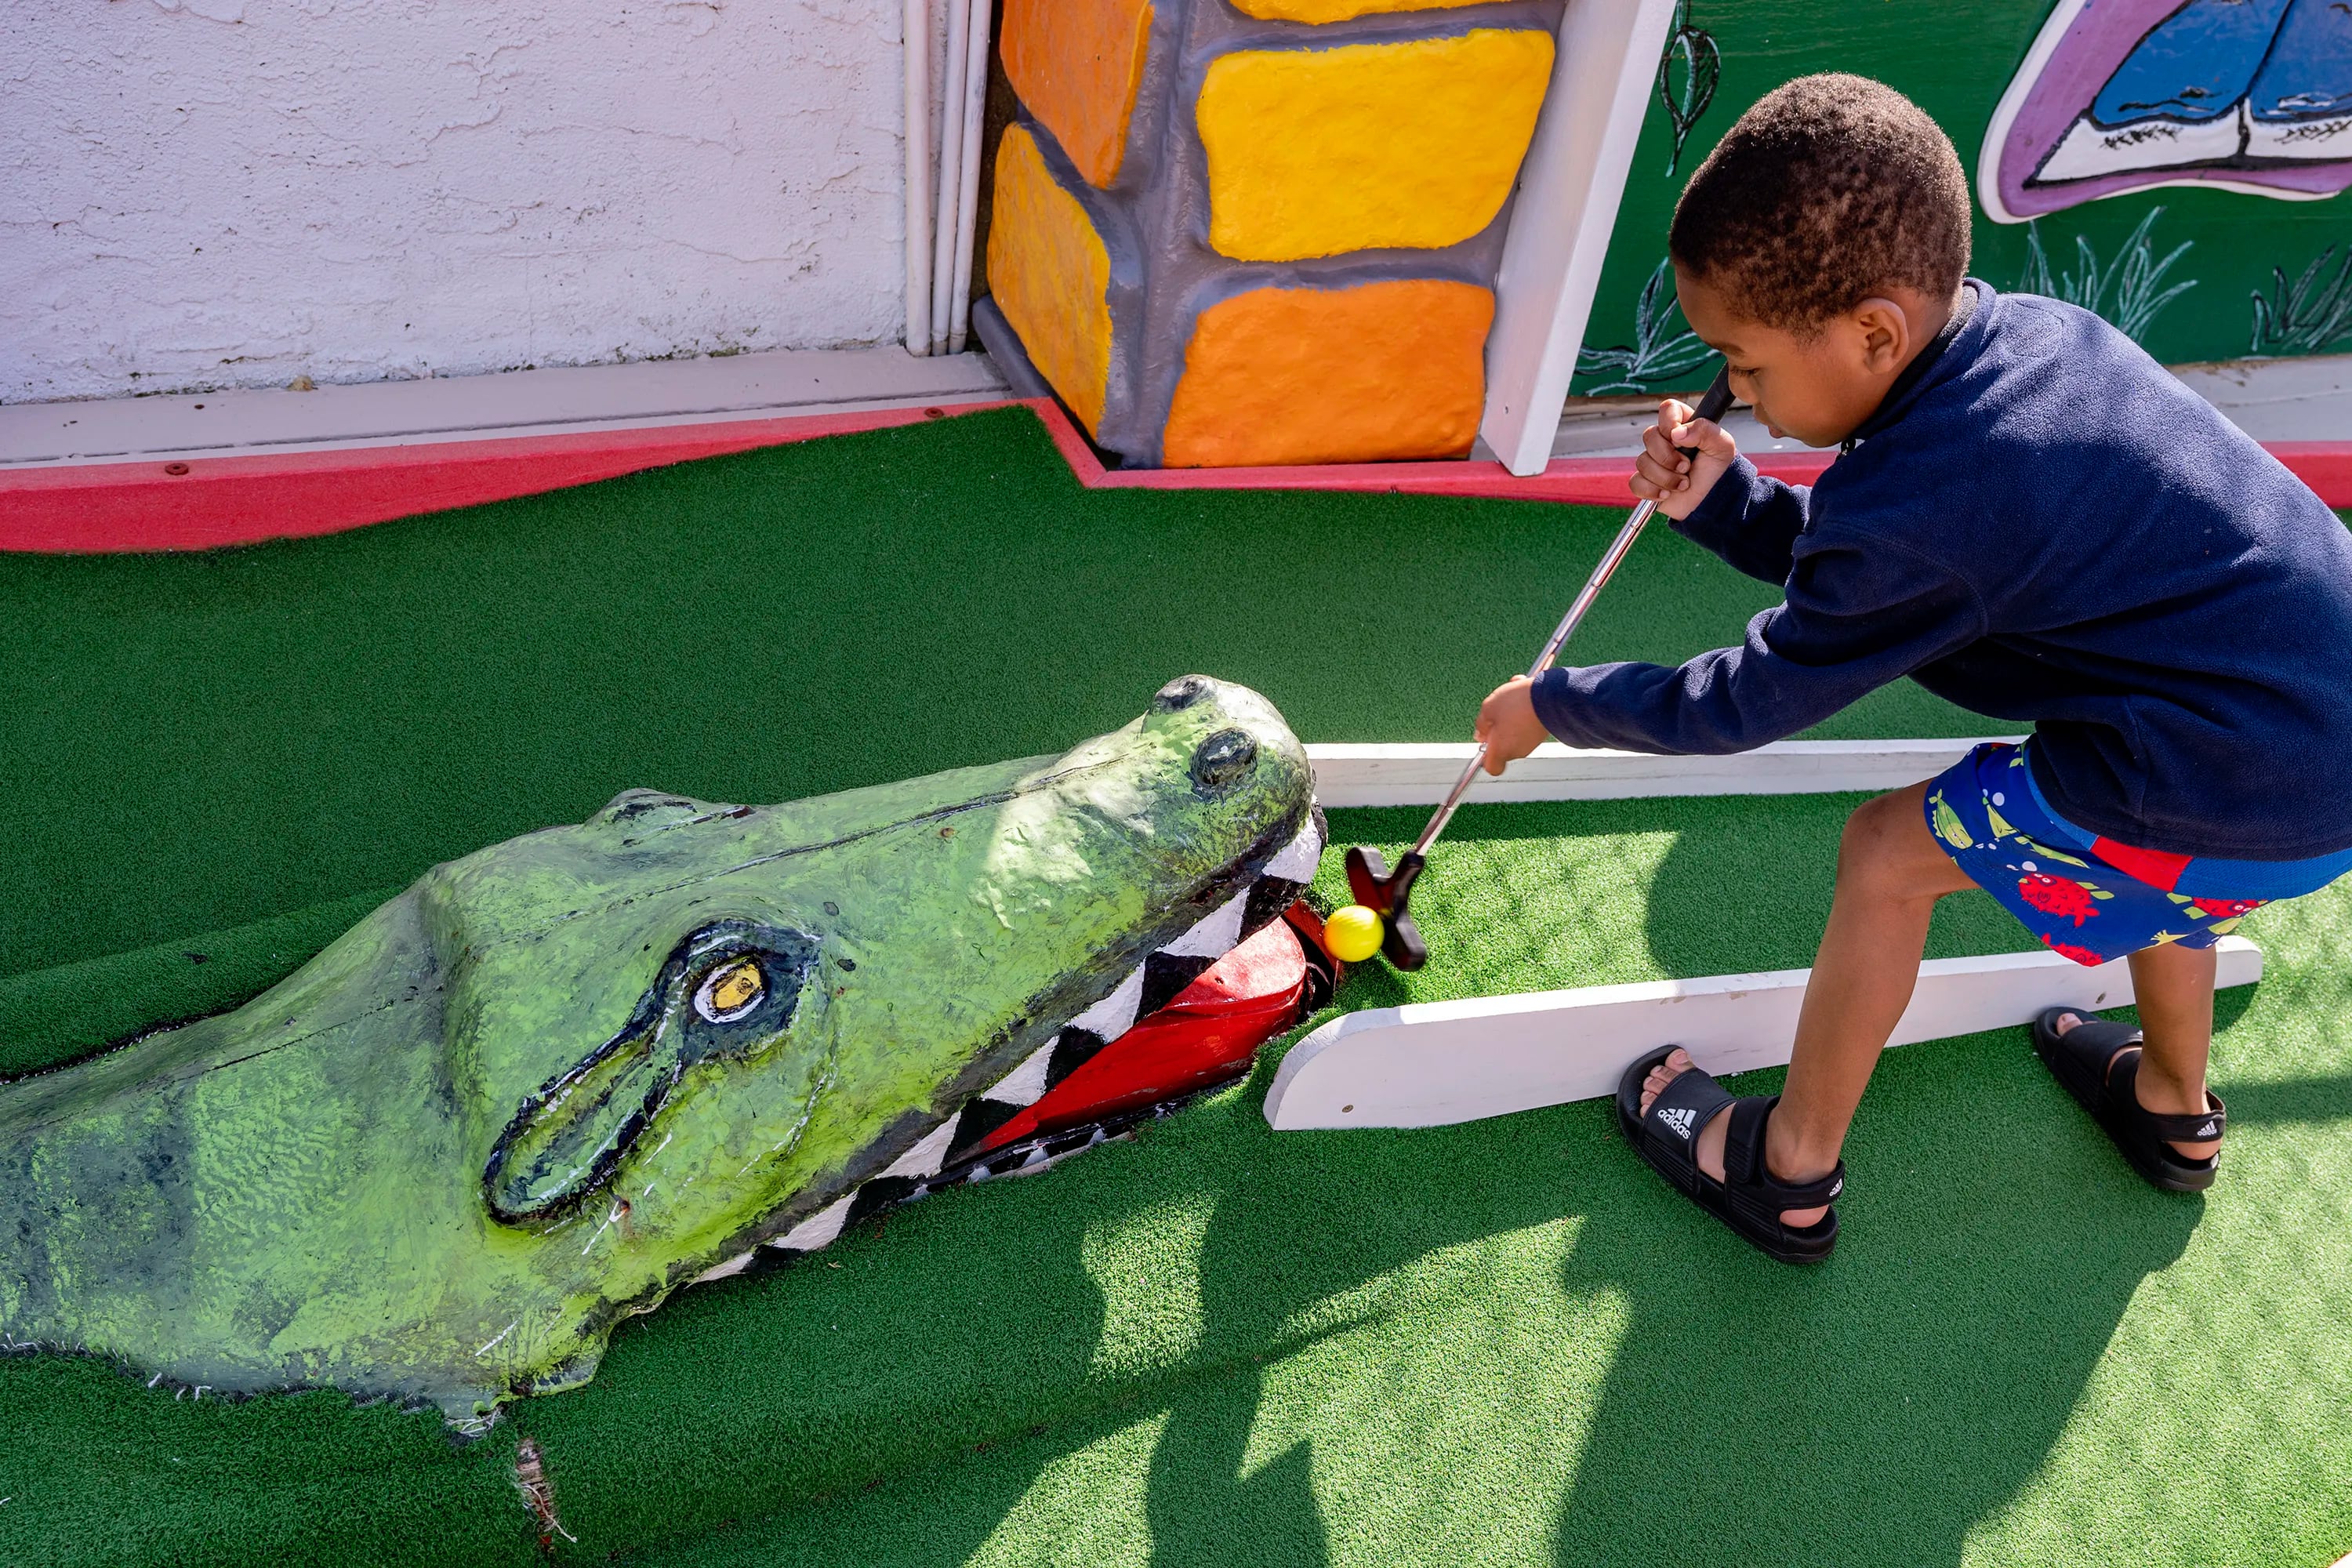 Justice, 5, takes on the alligator hazard at Tee Time Mini Golf in Ocean City. He was there with older brother and their mother.